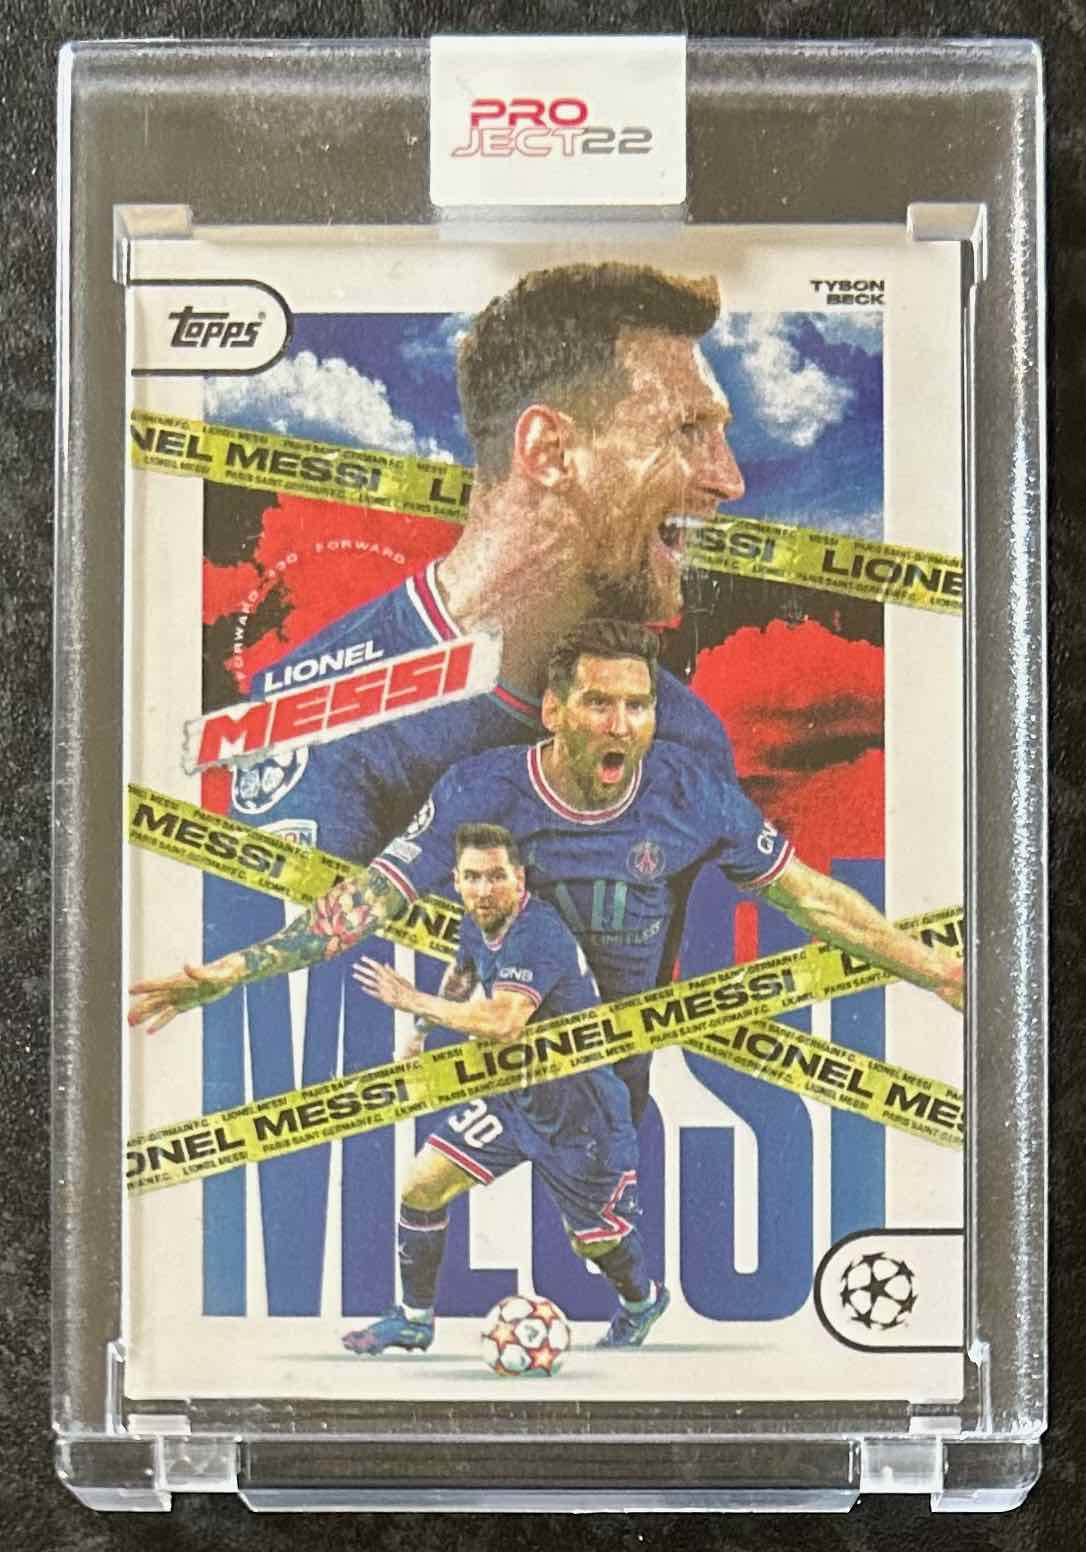 Lionel Messi (PSG) x Tyson Beck Topps Project 2022